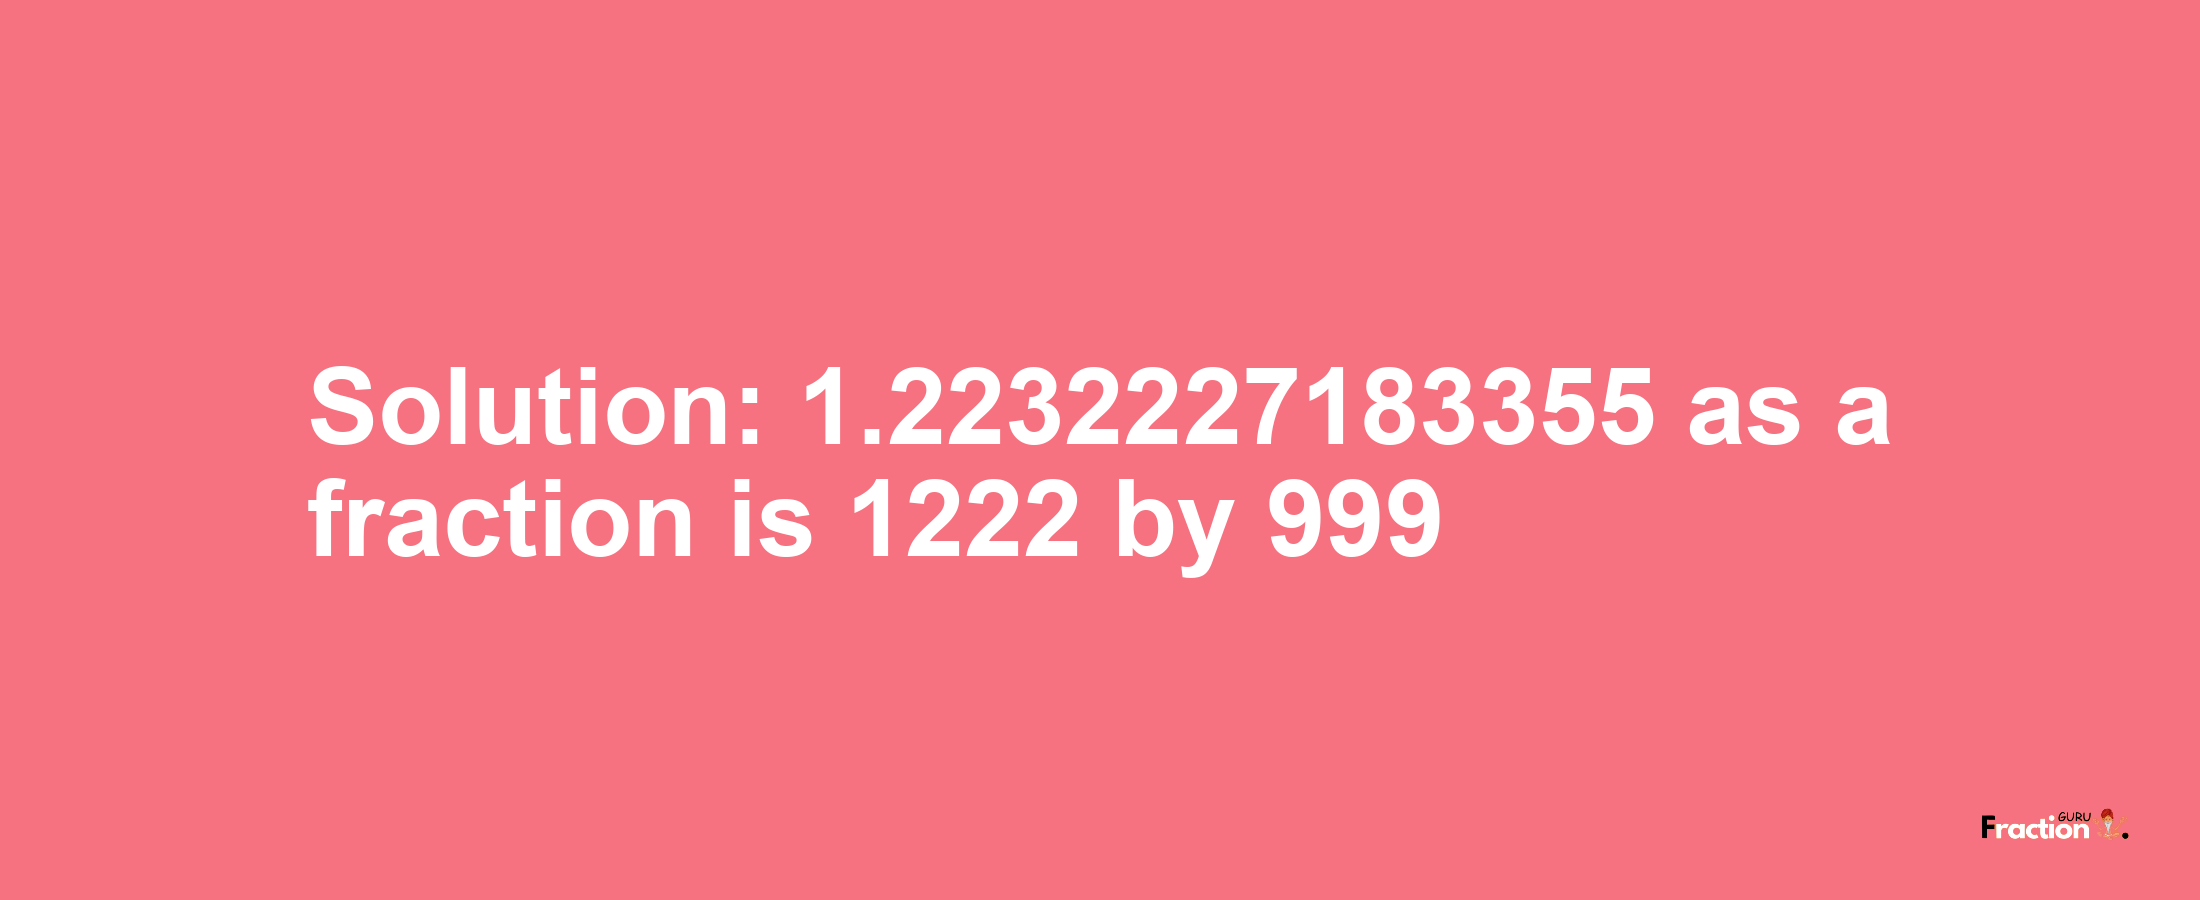 Solution:1.2232227183355 as a fraction is 1222/999